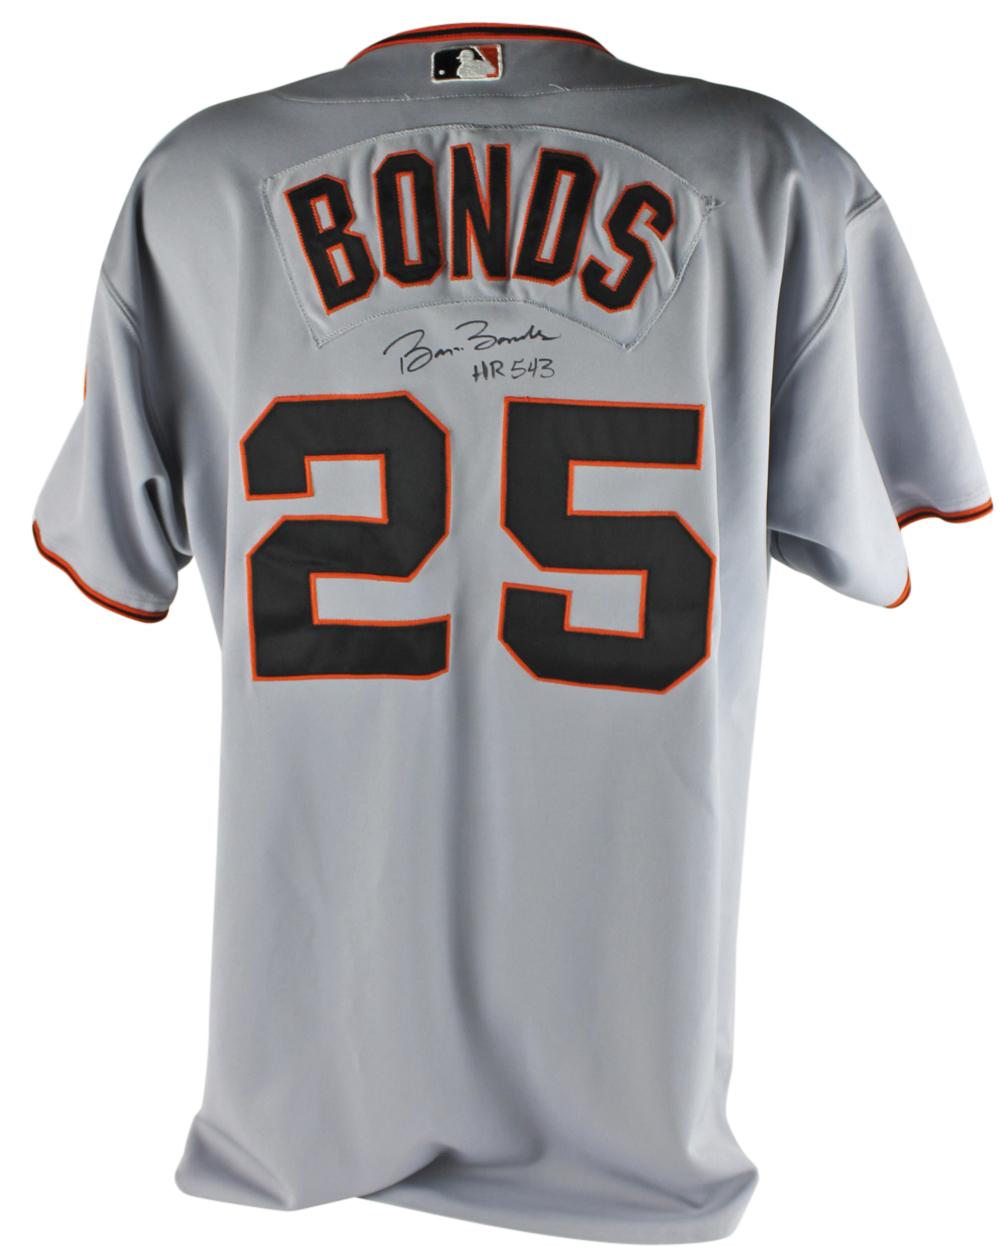 00's Barry Bonds San Francisco Giants Russell MLB Jersey Size